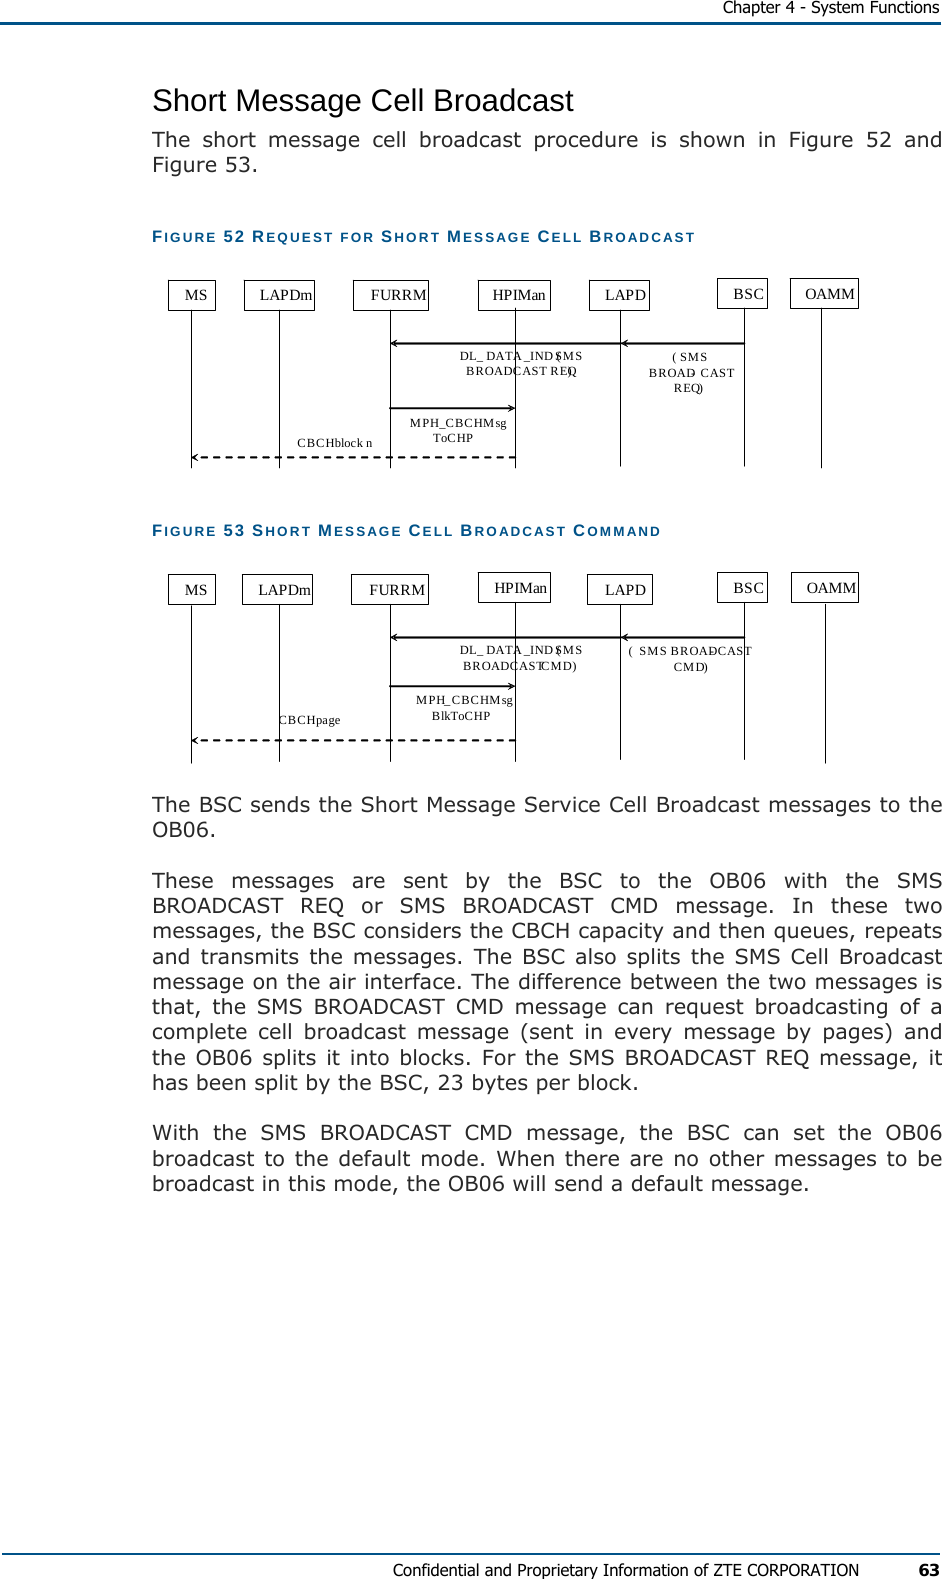   Chapter 4 - System Functions Confidential and Proprietary Information of ZTE CORPORATION 63 Short Message Cell Broadcast The short message cell broadcast procedure is shown in Figure 52 and Figure 53. FIGURE 52 REQUEST FOR SHORT MESSAGE CELL BROADCAST MS LAPDm FURRM HPIMan LAPD BSC OAMMDL_ DATA_IND (SMS BROADCAST REQ)(SMS BROAD-CAST REQ)CBCH block  nMPH_CBCHMsgToCHP FIGURE 53 SHORT MESSAGE CELL BROADCAST COMMAND  MS LAPDm FURRM HPIMan LAPD BSC OAMMDL_ DATA_IND (SMS BROADCAST CMD) ( SMS BROAD-CAST CMD)MPH_CBCHMsgBlkToCHPCBCH page The BSC sends the Short Message Service Cell Broadcast messages to the OB06. These messages are sent by the BSC to the OB06 with the SMS BROADCAST REQ or SMS BROADCAST CMD message. In these two messages, the BSC considers the CBCH capacity and then queues, repeats and transmits the messages. The BSC also splits the SMS Cell Broadcast message on the air interface. The difference between the two messages is that, the SMS BROADCAST CMD message can request broadcasting of a complete cell broadcast message (sent in every message by pages) and the OB06 splits it into blocks. For the SMS BROADCAST REQ message, it has been split by the BSC, 23 bytes per block. With the SMS BROADCAST CMD message, the BSC can set the OB06 broadcast to the default mode. When there are no other messages to be broadcast in this mode, the OB06 will send a default message. 